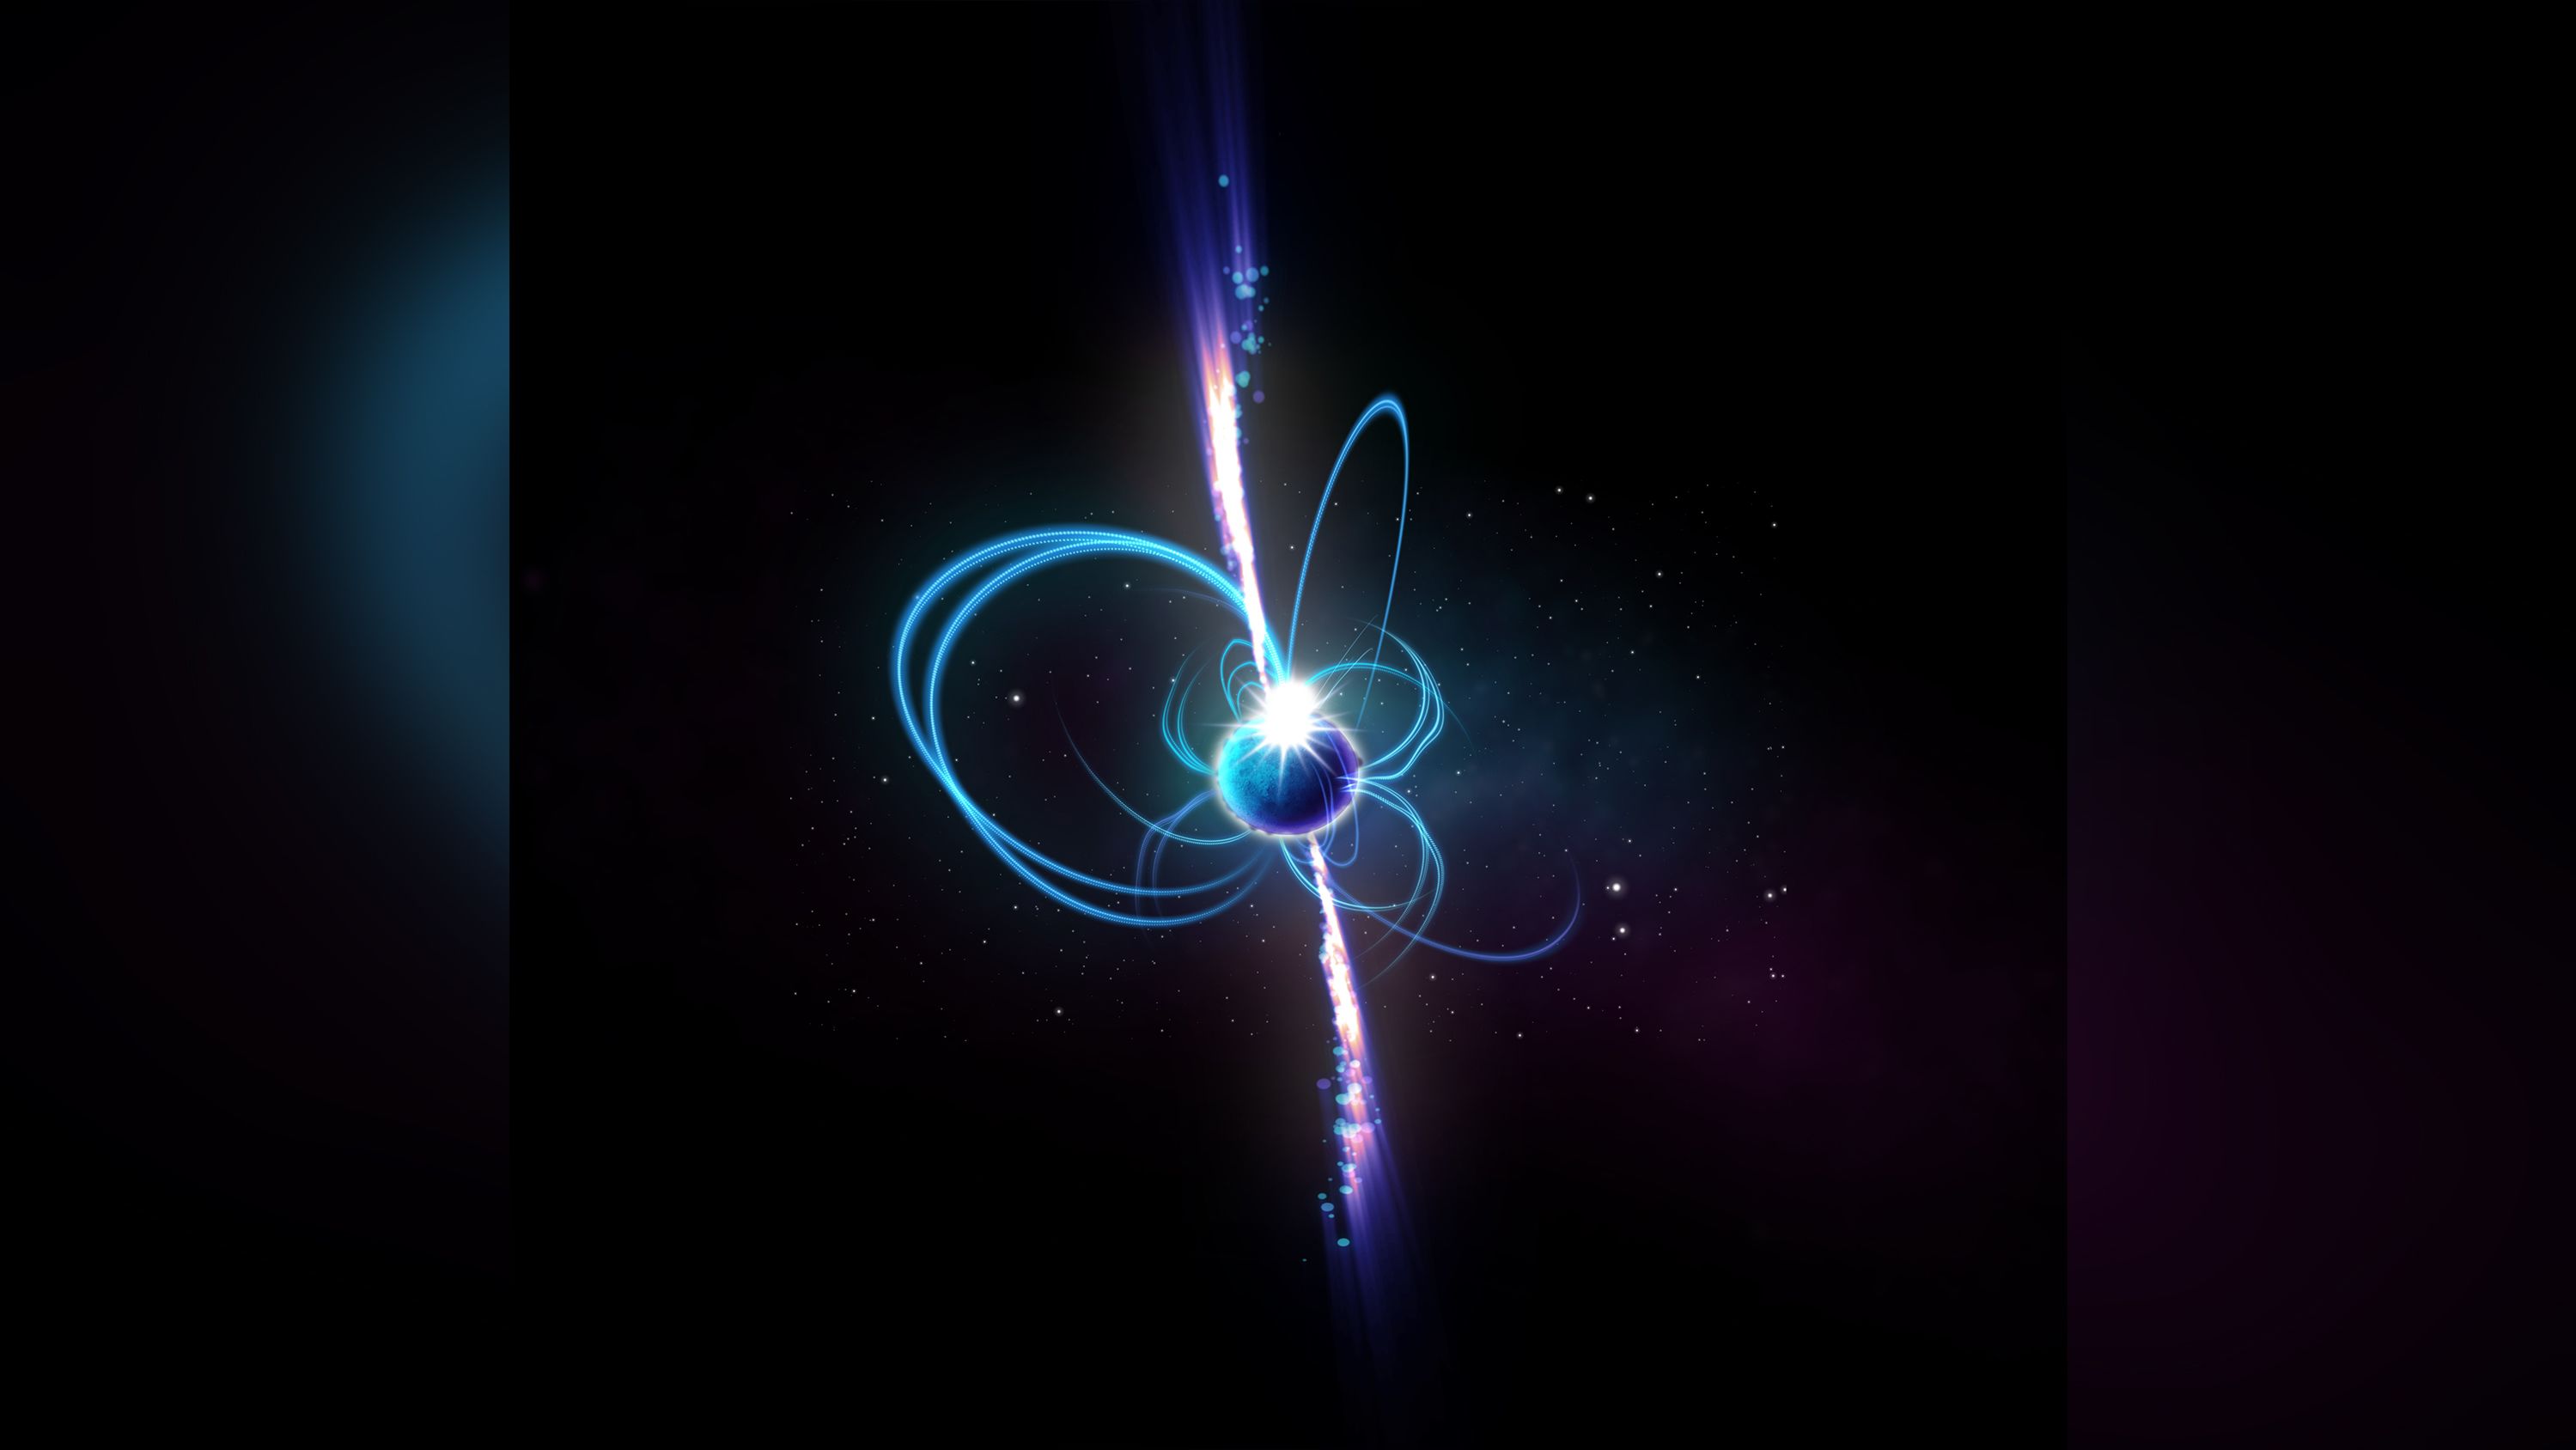 This is an artist's impression of what the object might look like if it's a magnetar, or an incredibly magnetic neutron star.